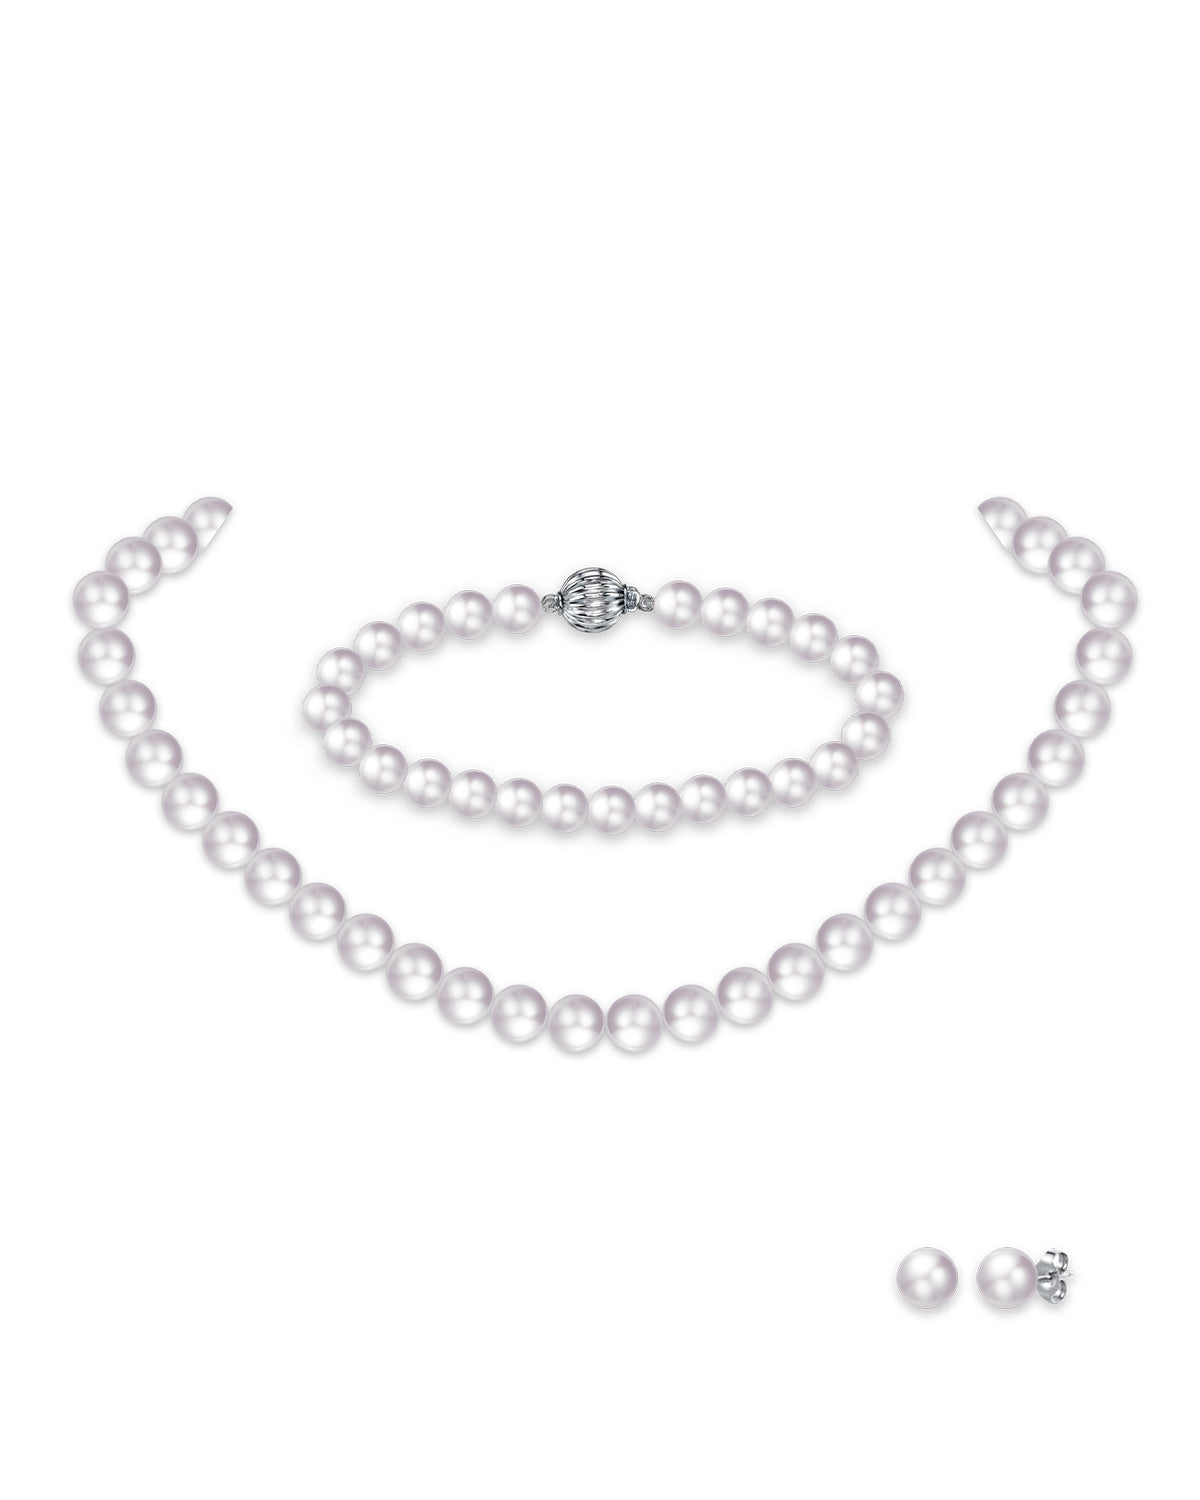 7.0-7.5mm Freshwater Pearl Set - AAA Quality